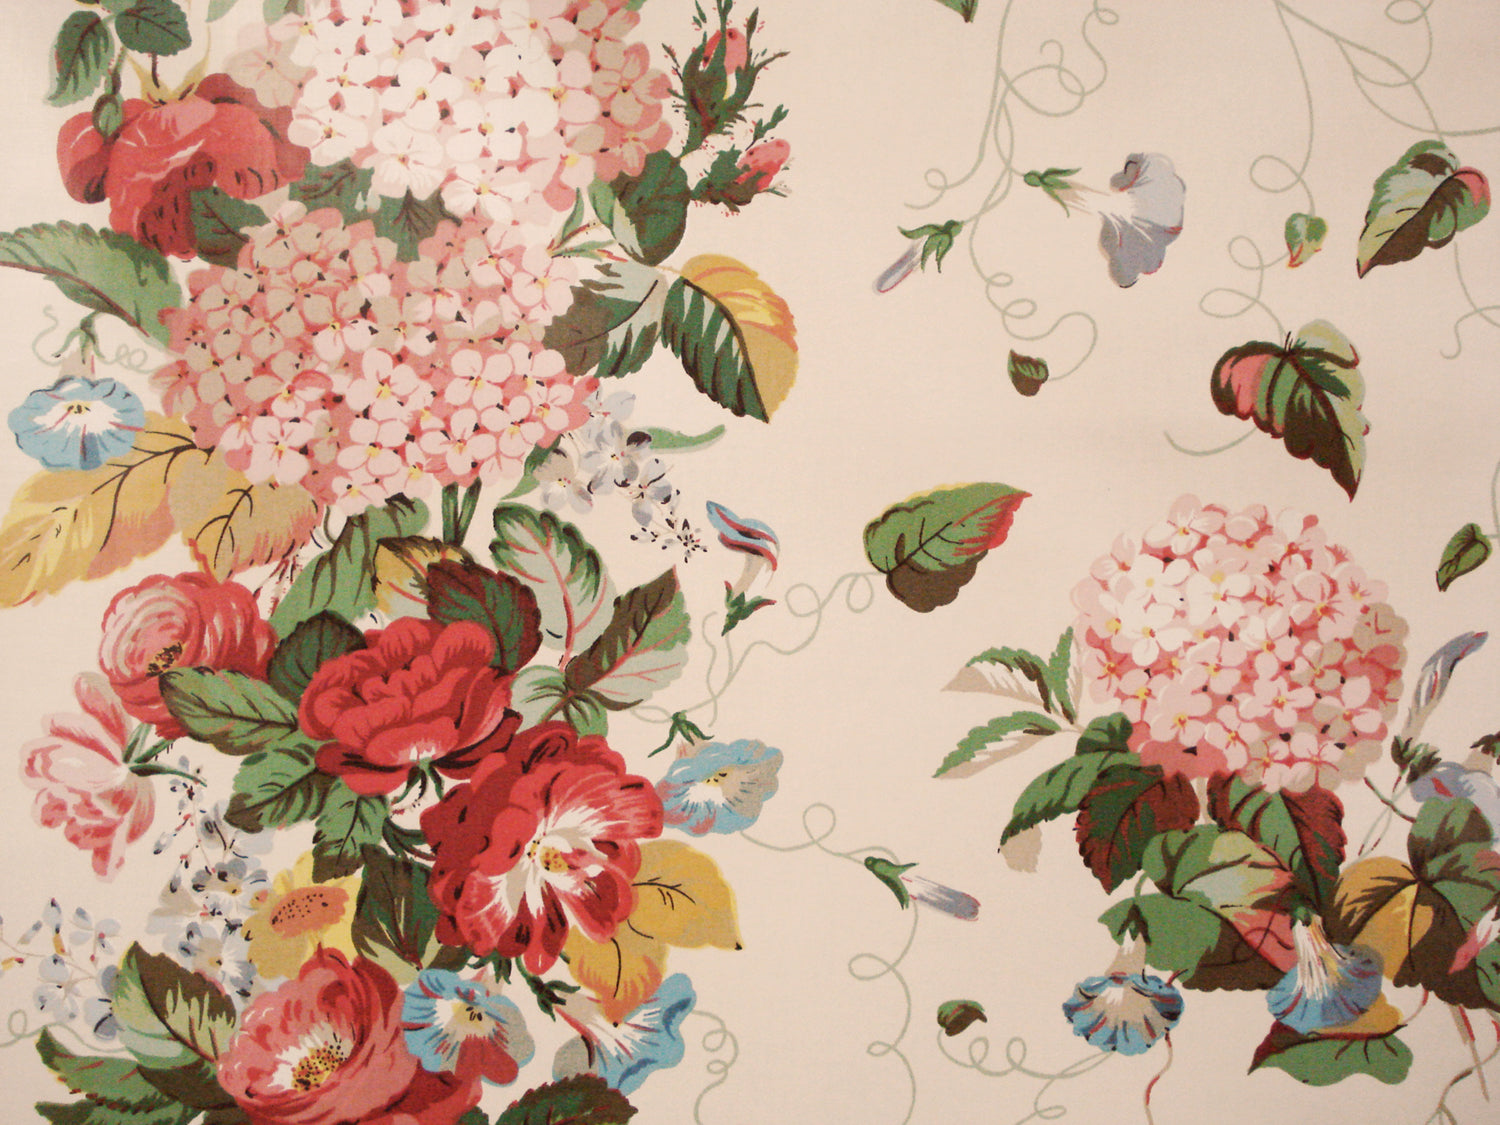 peach fabric printed with bunches of hydrangeas, and a border strip of dense floral print